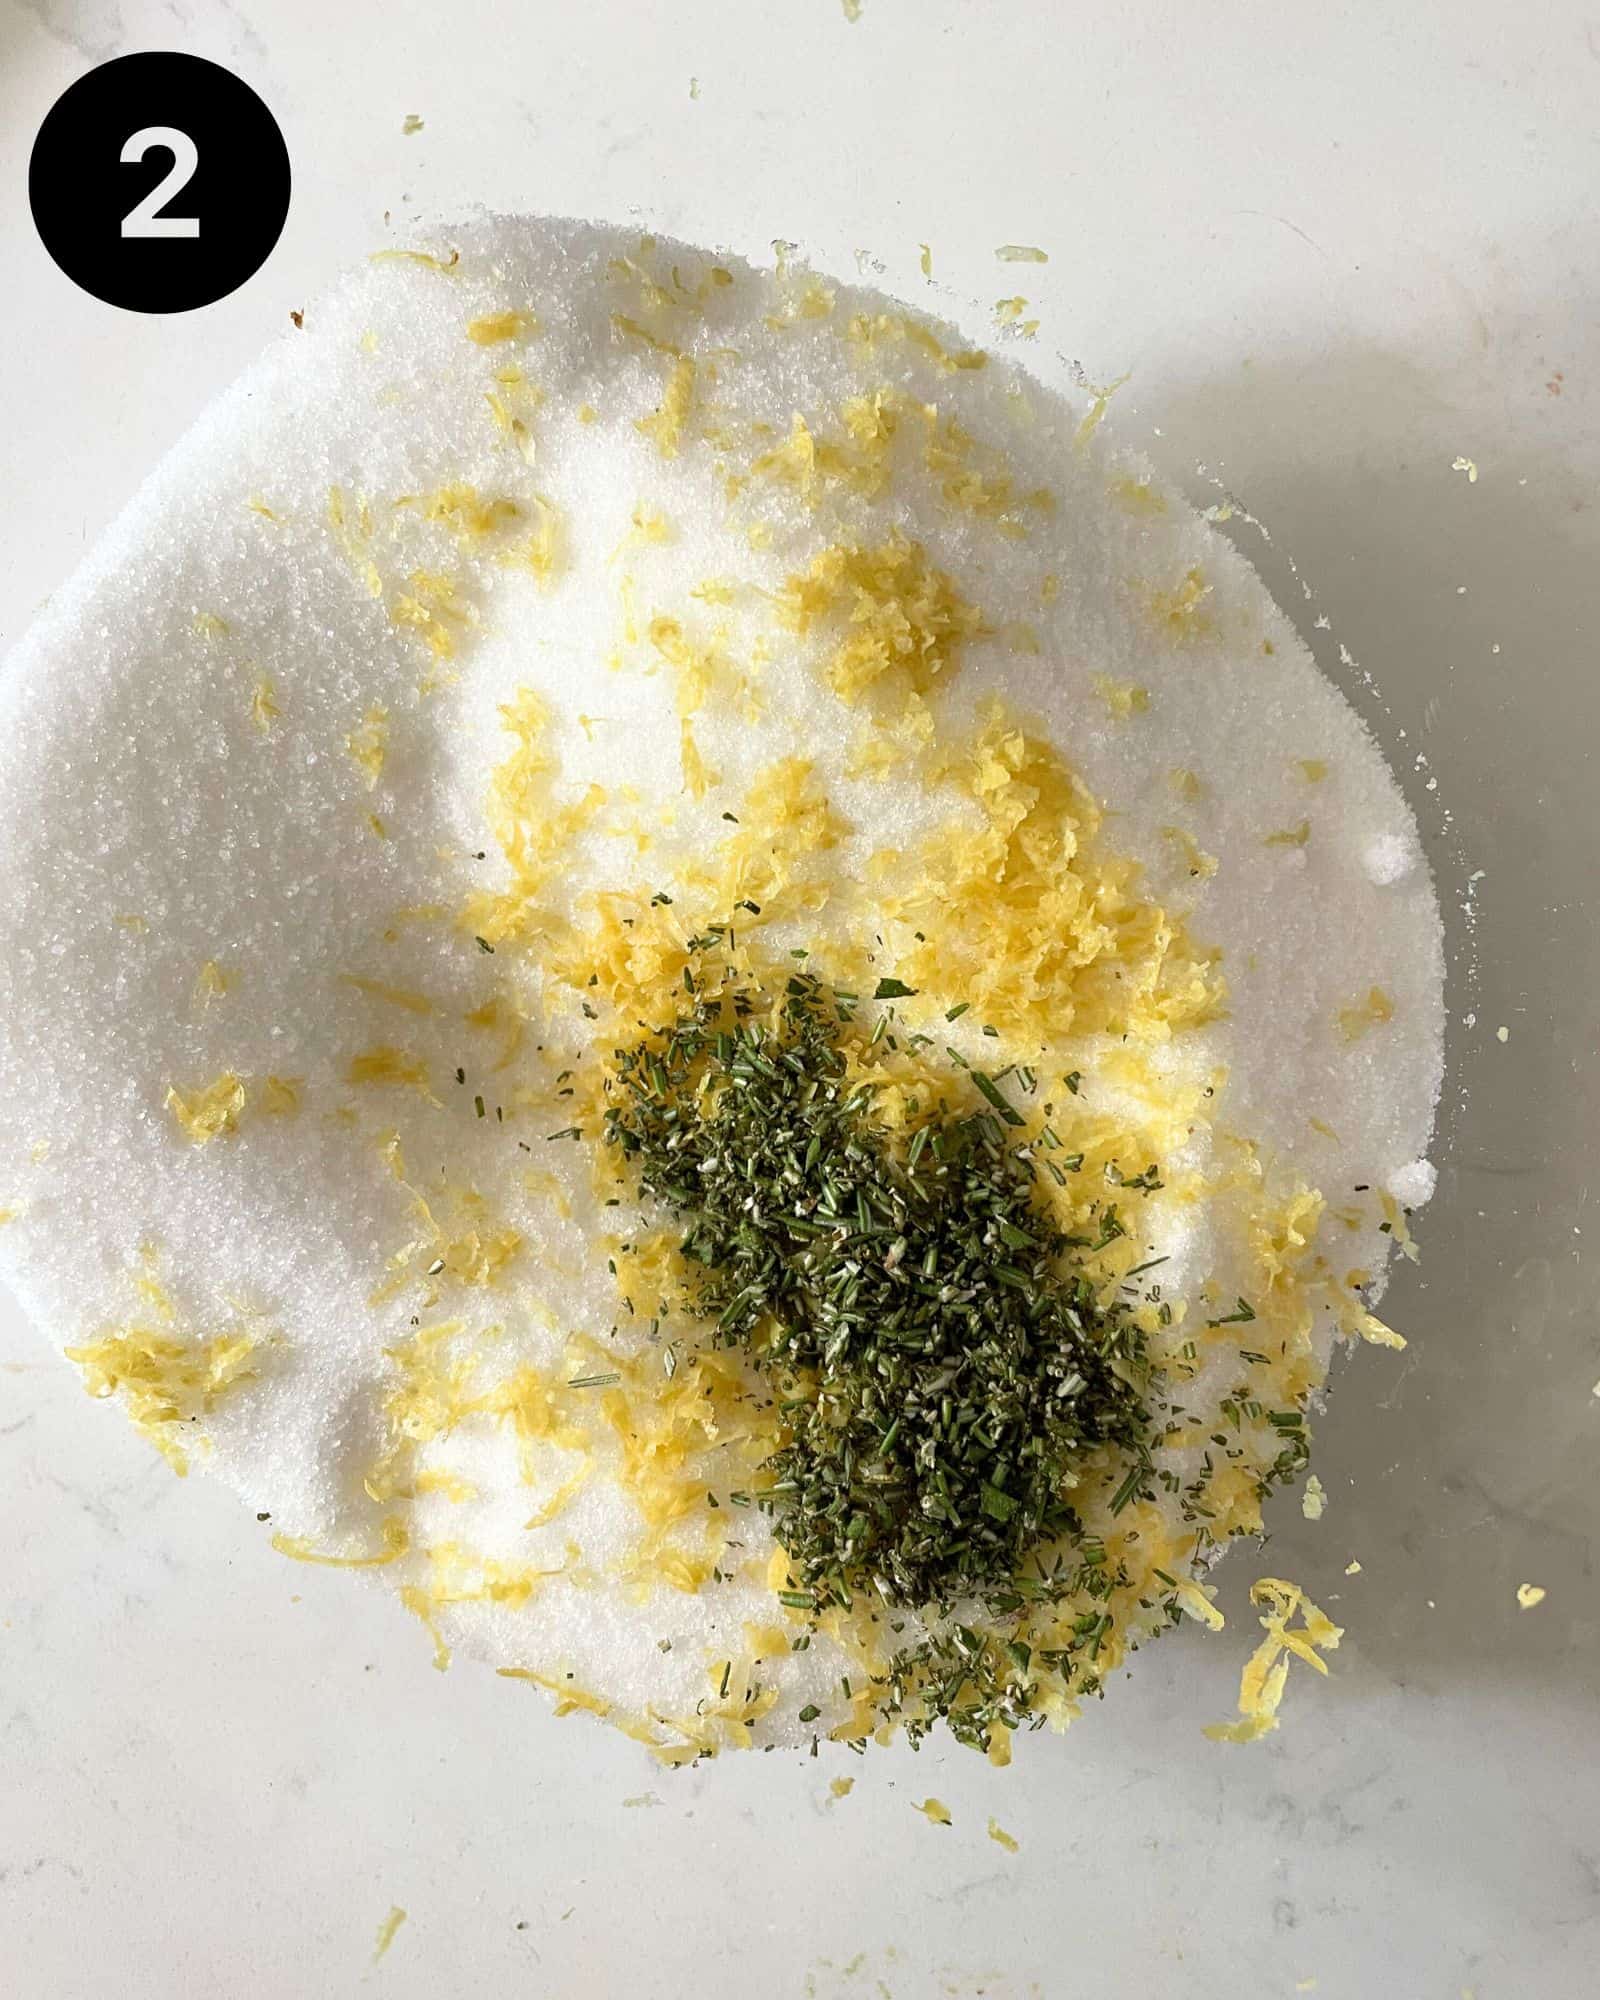 sugar, rosemary, and lemon zest in a mixing bowl.